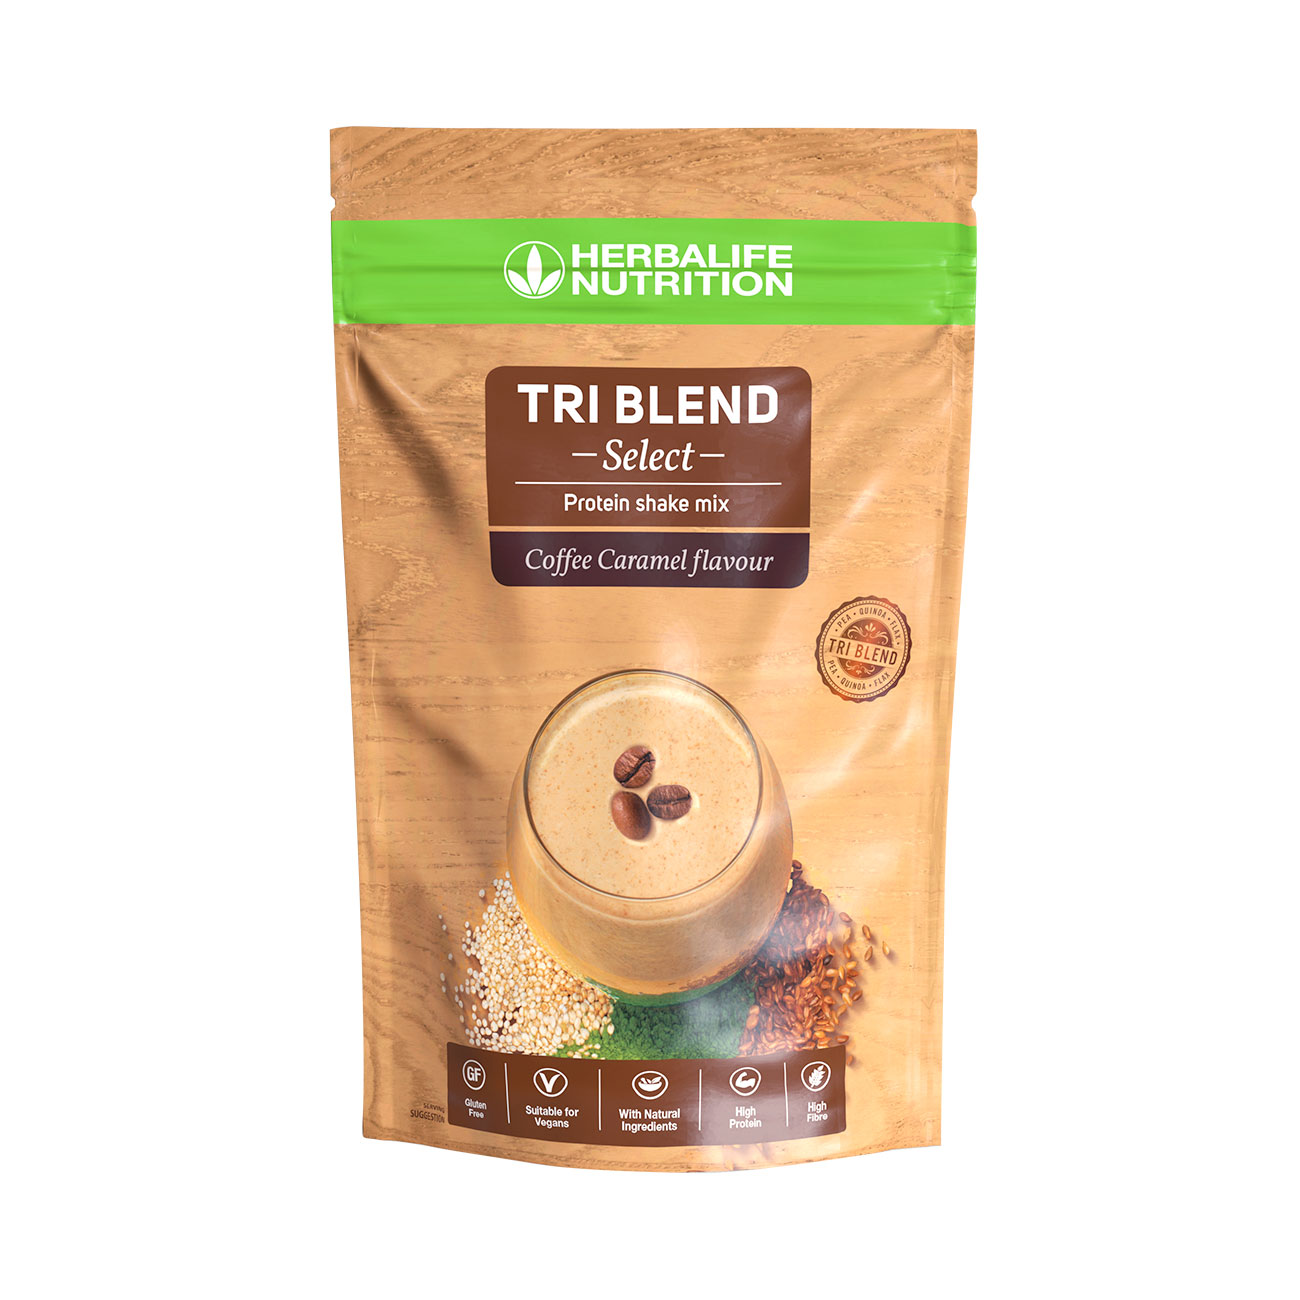 Tri Blend Select Protein Shake Coffee Caramel product shot.